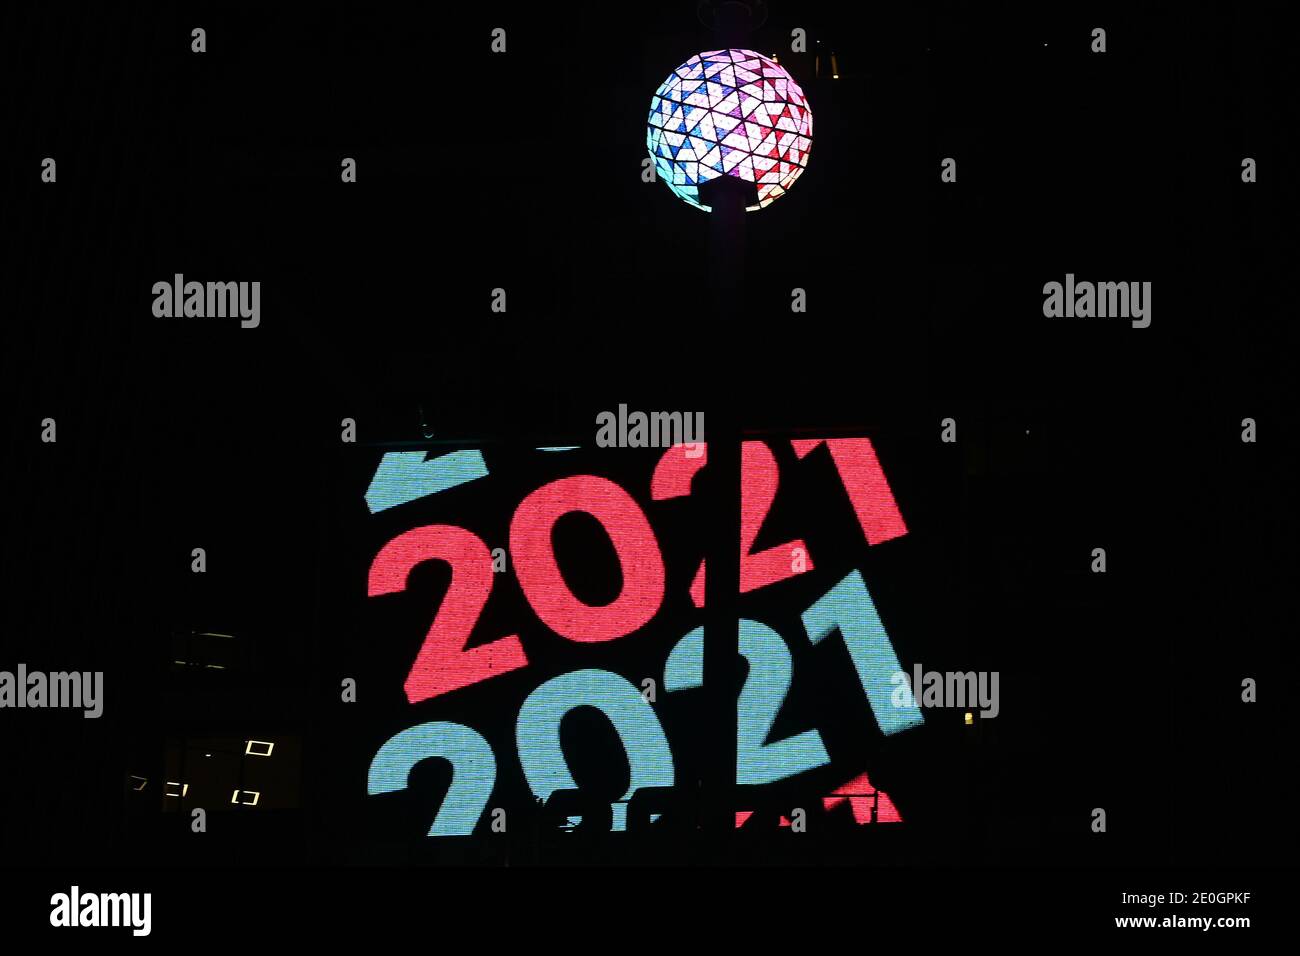 New York, USA. 31st Dec, 2020. A view of the Times Square New Year's Eve Ball as Times Square remains closed off to revelers due to the ongoing Coronavirus pandemic, New York, NY, December 31, 2020. The traditional gathering of New Year's Eve revelers in Times Square has been restricted due to the COVID-19 surge, as the United States sets new daily records in the number of deaths and hospitalizations due to Coronavirus infections. (Photo by Anthony Behar/Sipa USA) Credit: Sipa USA/Alamy Live News Stock Photo